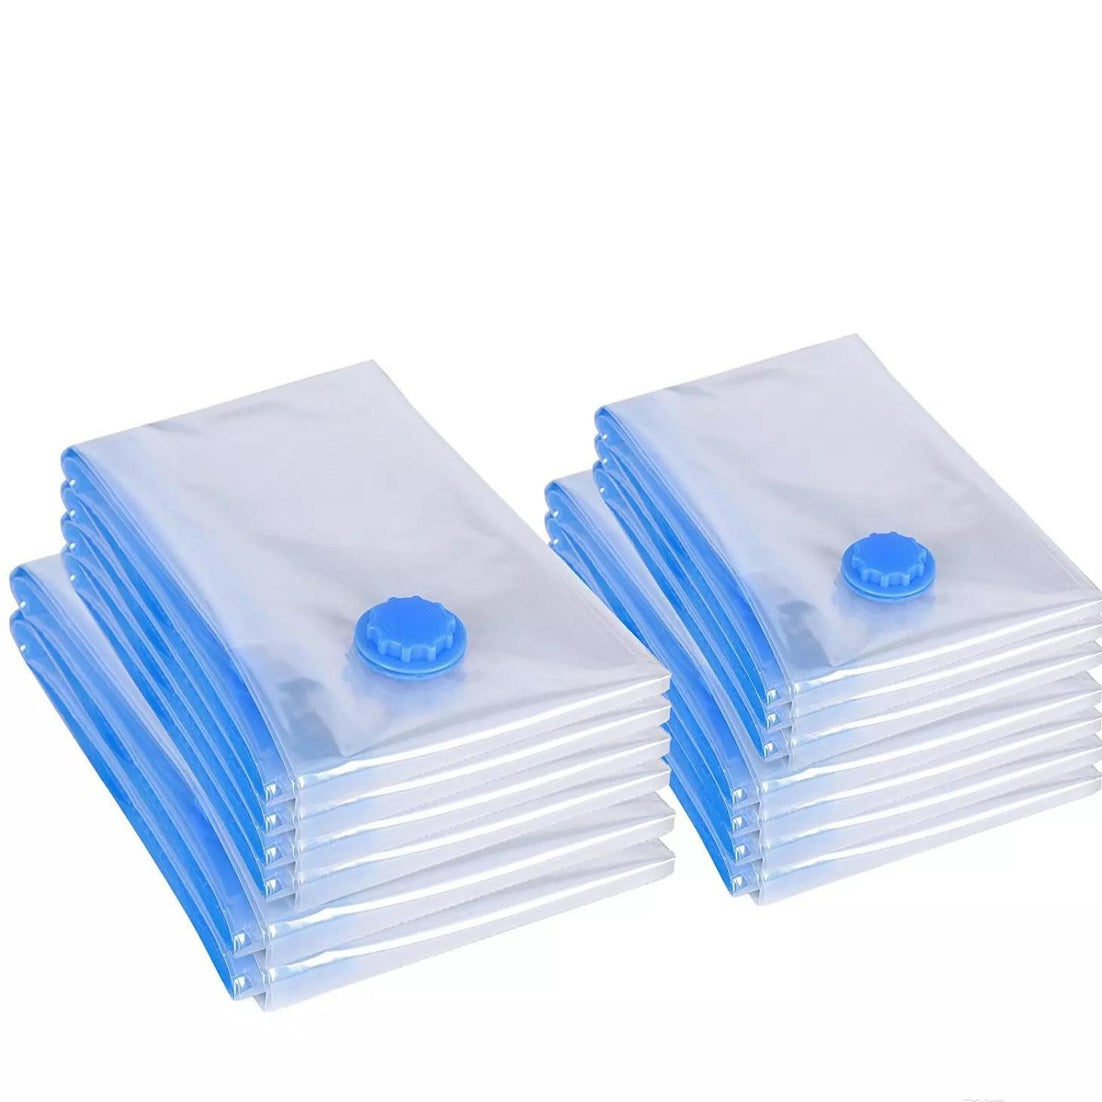 Vacuum Storage Bags 5PCS for Comforters Blankets Clothes Pillows